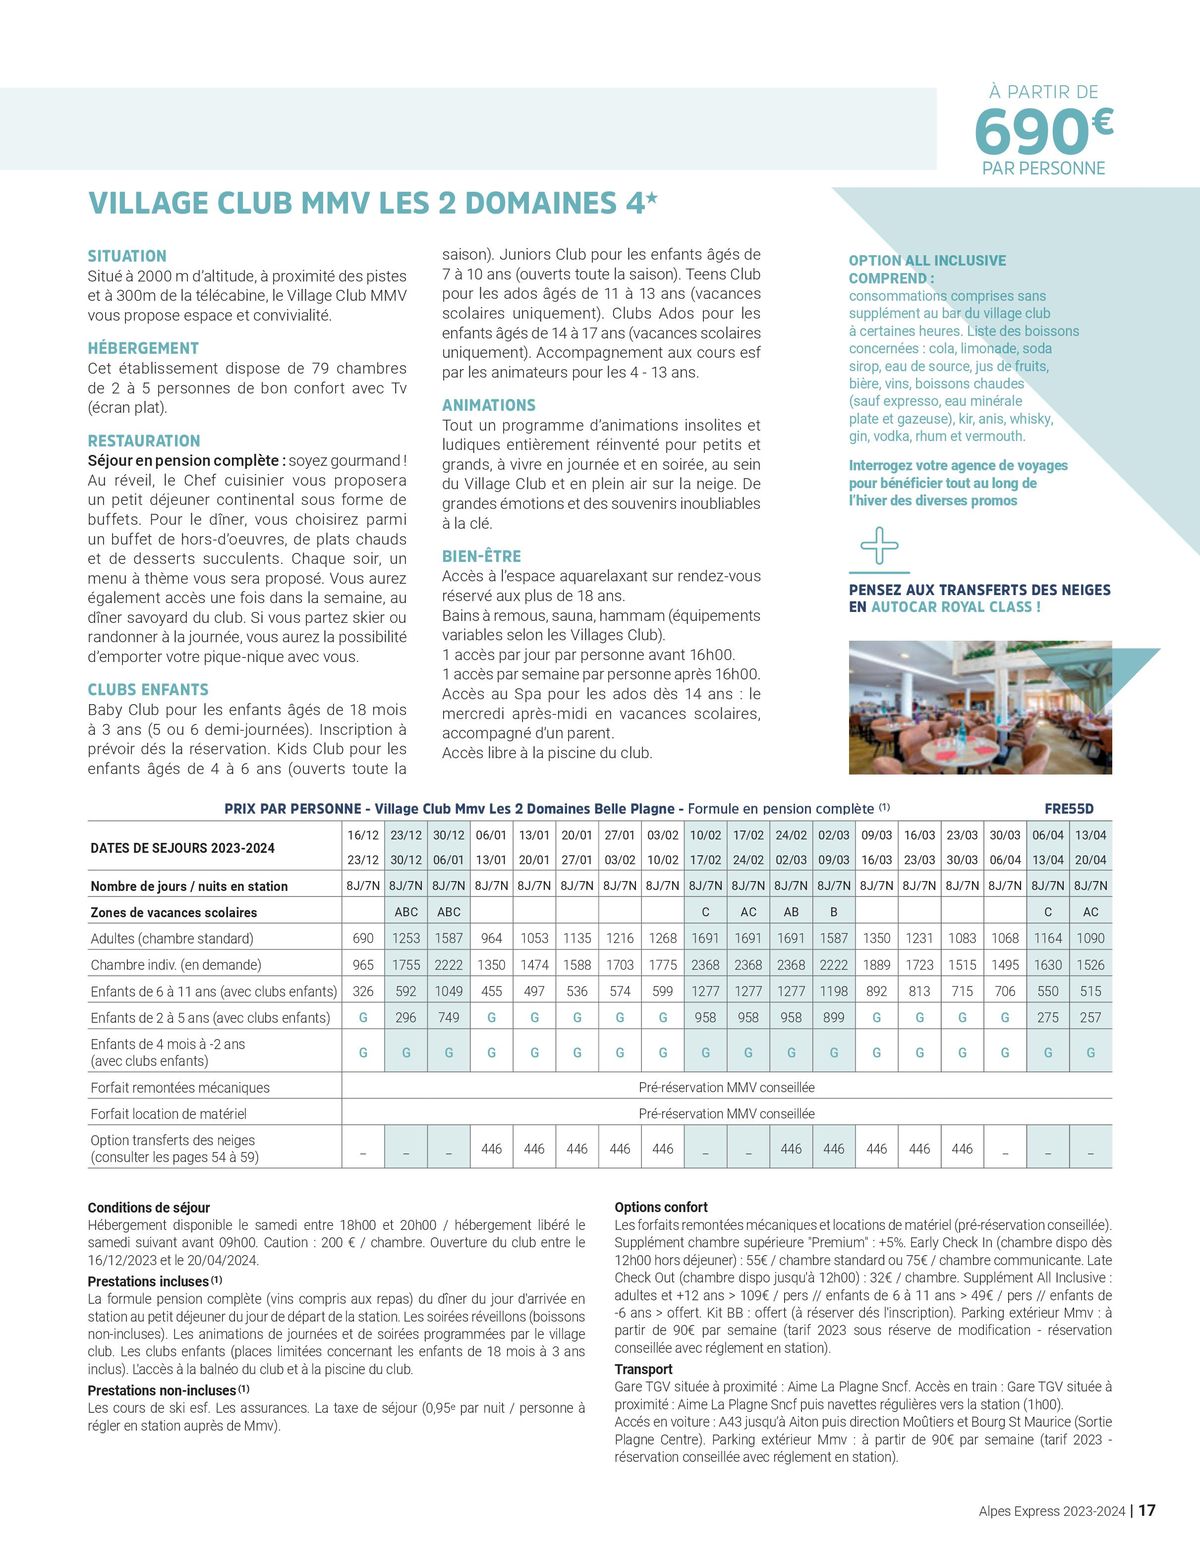 Catalogue Alpes Express - Hiver 2023 - 2024, page 00017